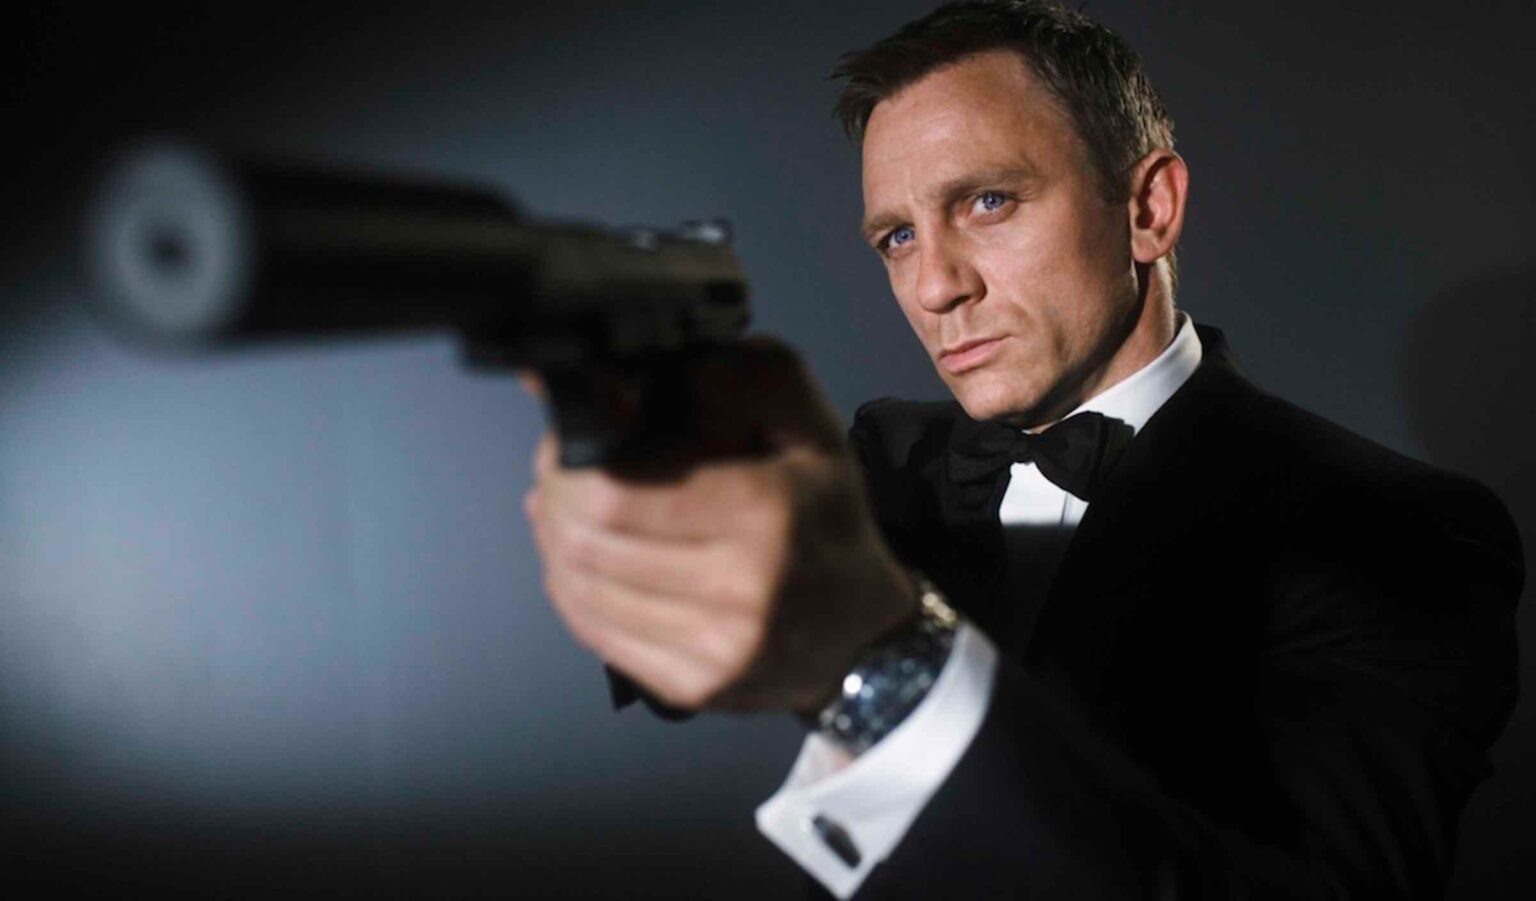 Daniel Craig has revealed who he doesn’t want for the role of James Bond in any future movie. Report back to MI6 to see who Craig doesn't want to be 007!